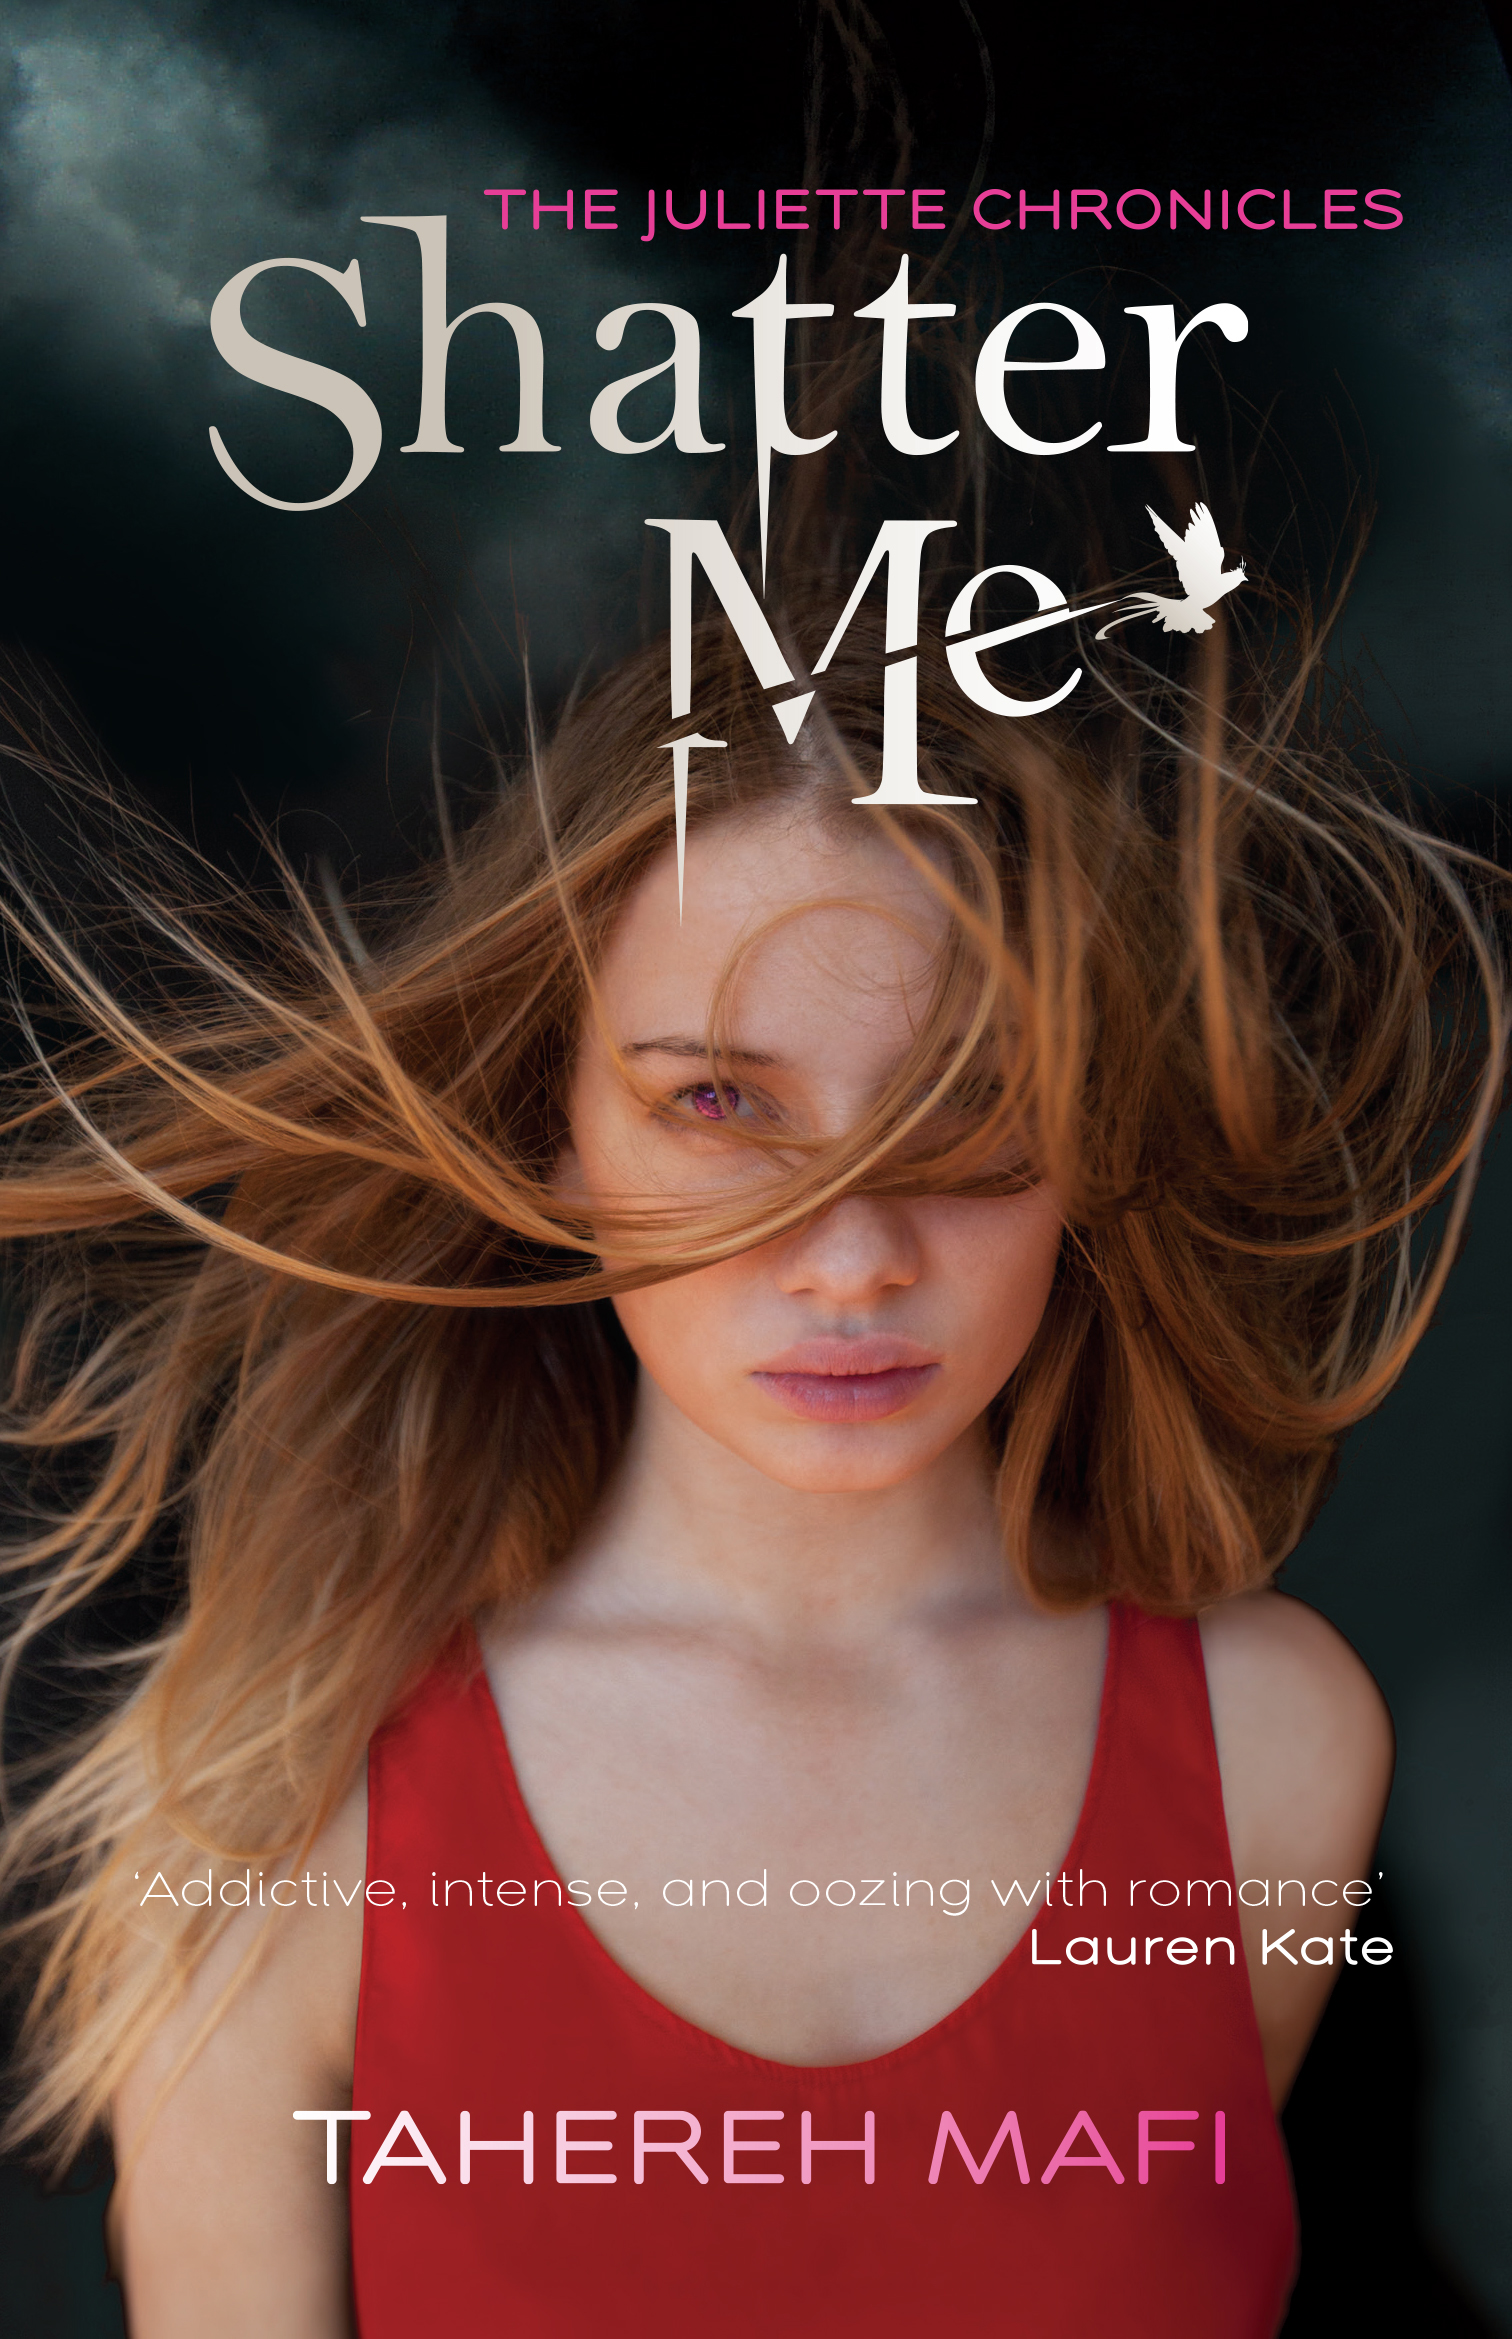 shatter me movie release date